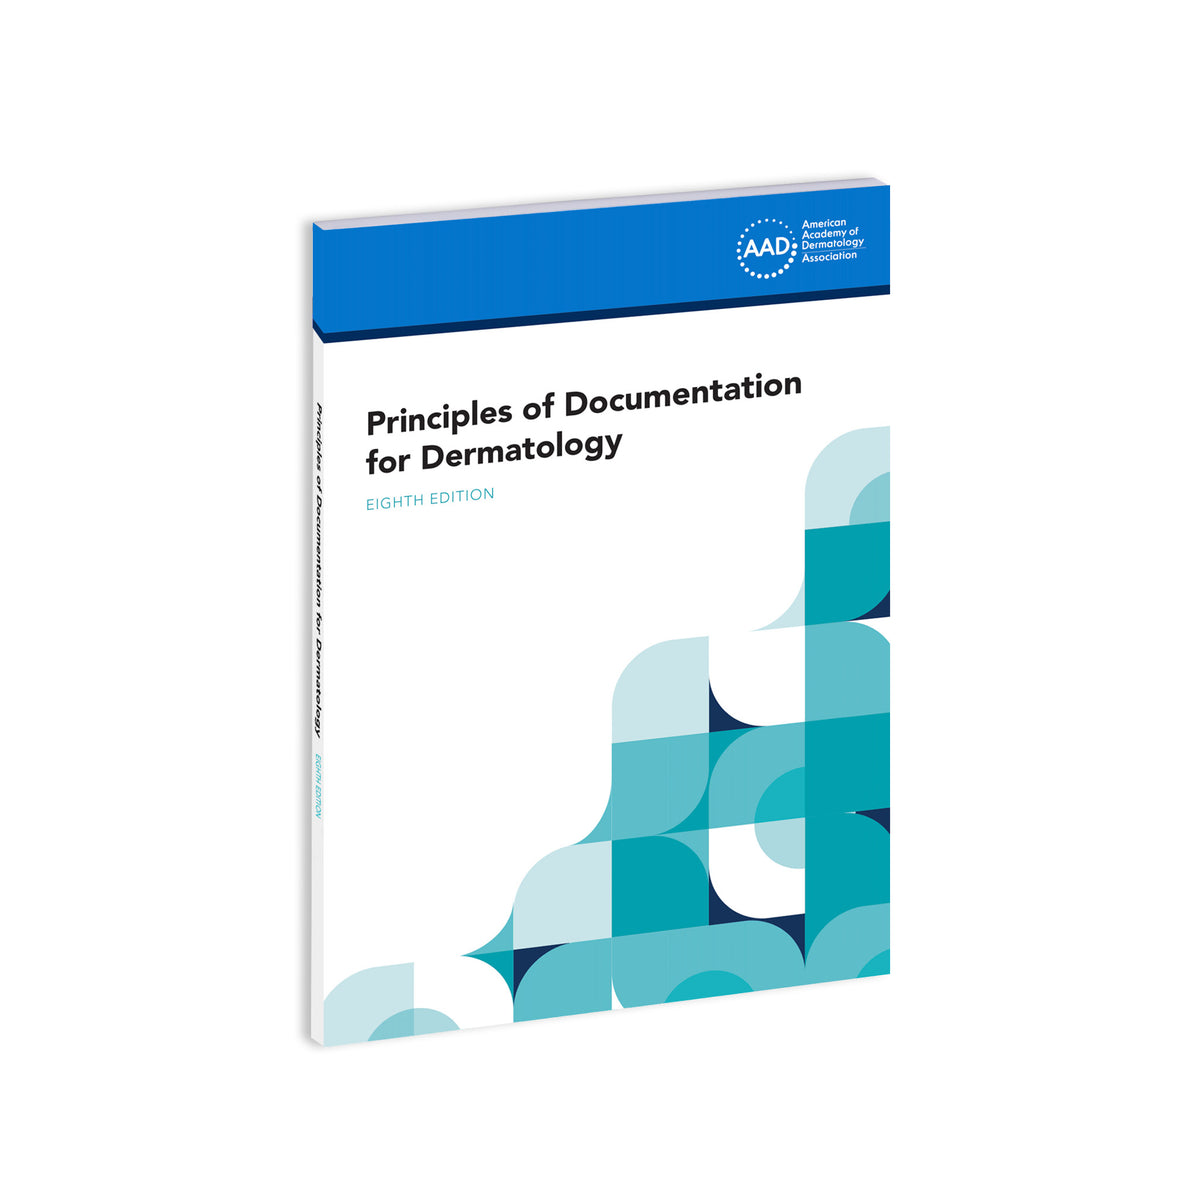 Principles of Documentation for Dermatology, Eighth Edition